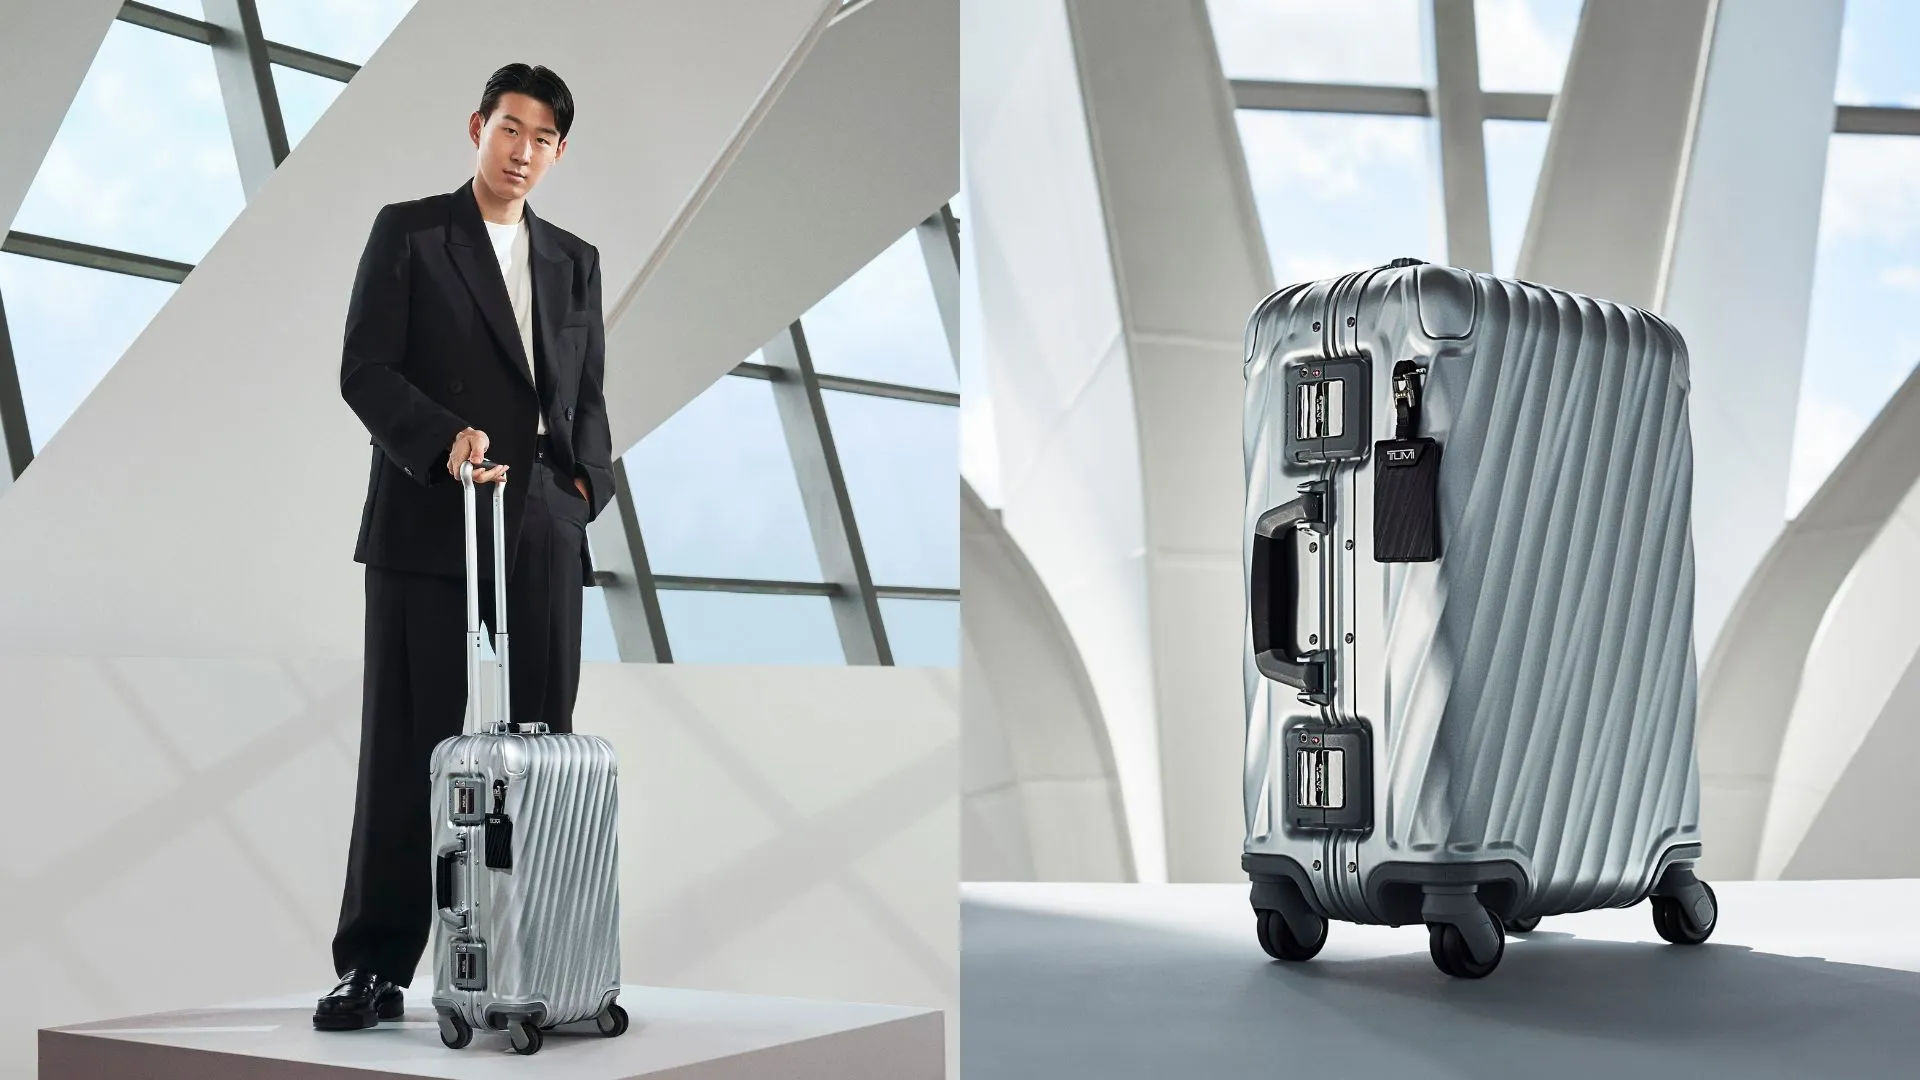 TUMI - 19 Degree International Expandable 4-Wheel Carry On - Hard Shell  Carry On Luggage - Rolling Carry On Luggage for Plane & International  Travel 